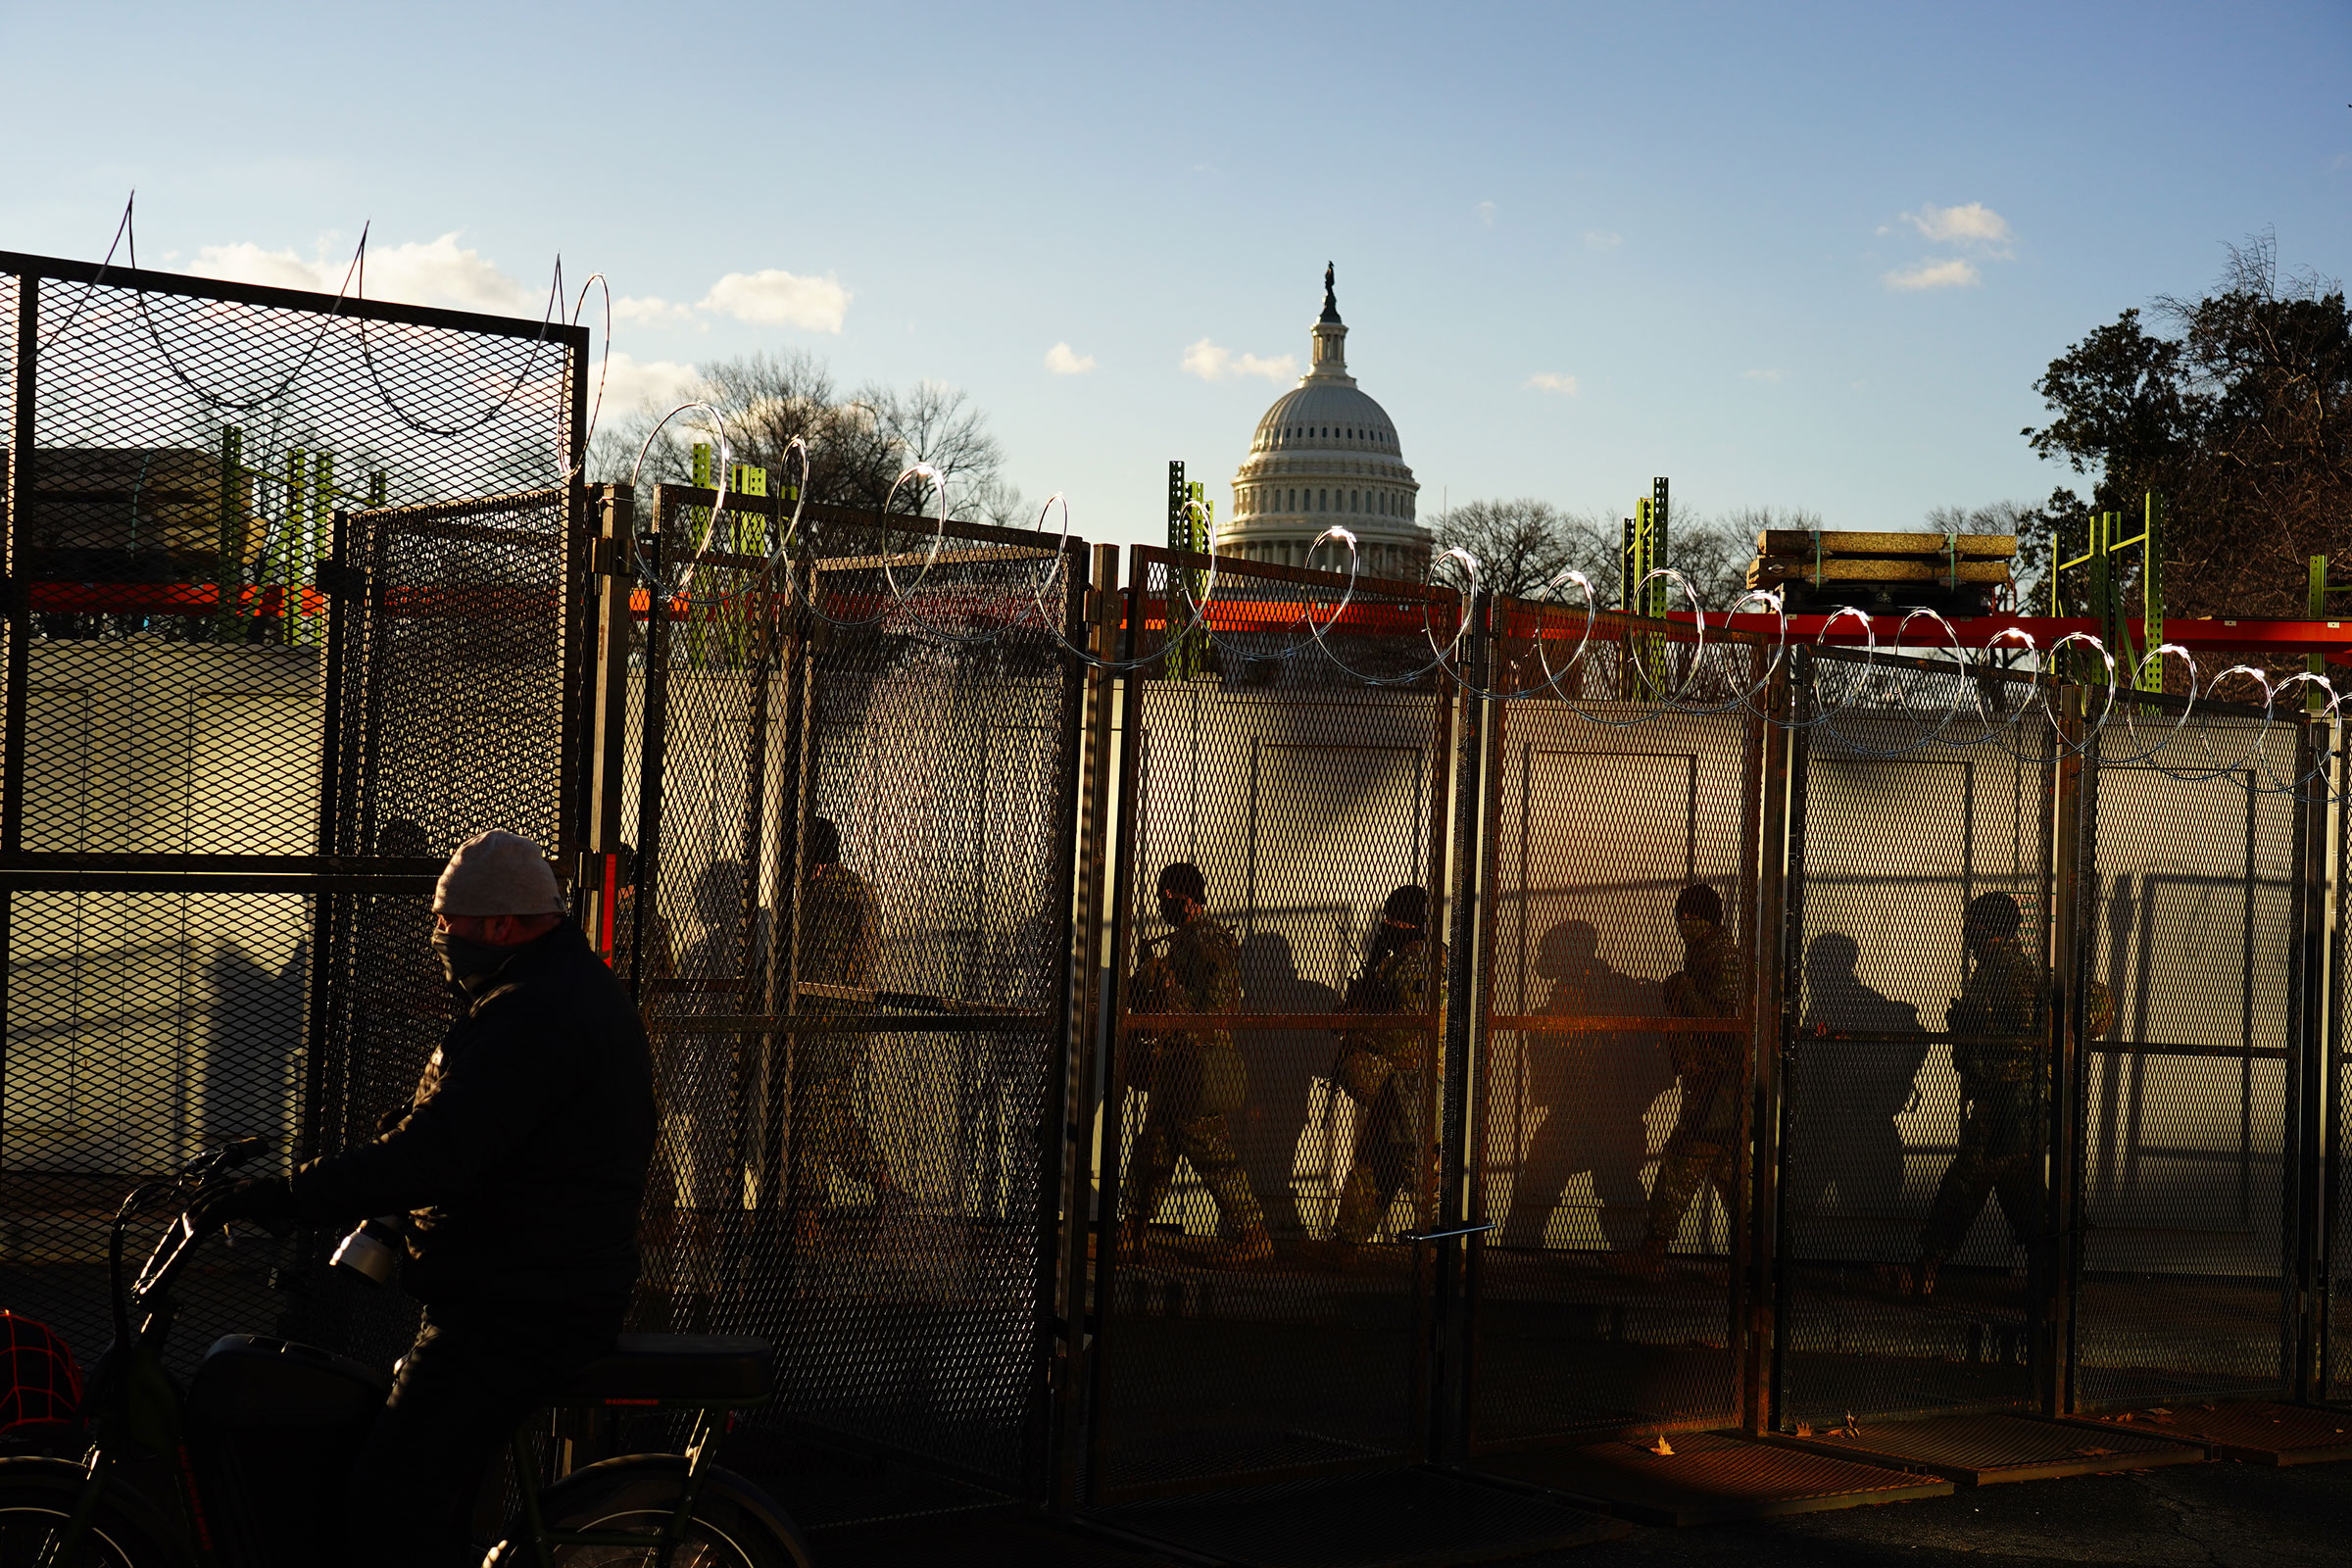 Security and fencing in front of the U.S. Capital building prior to the start inauguration.